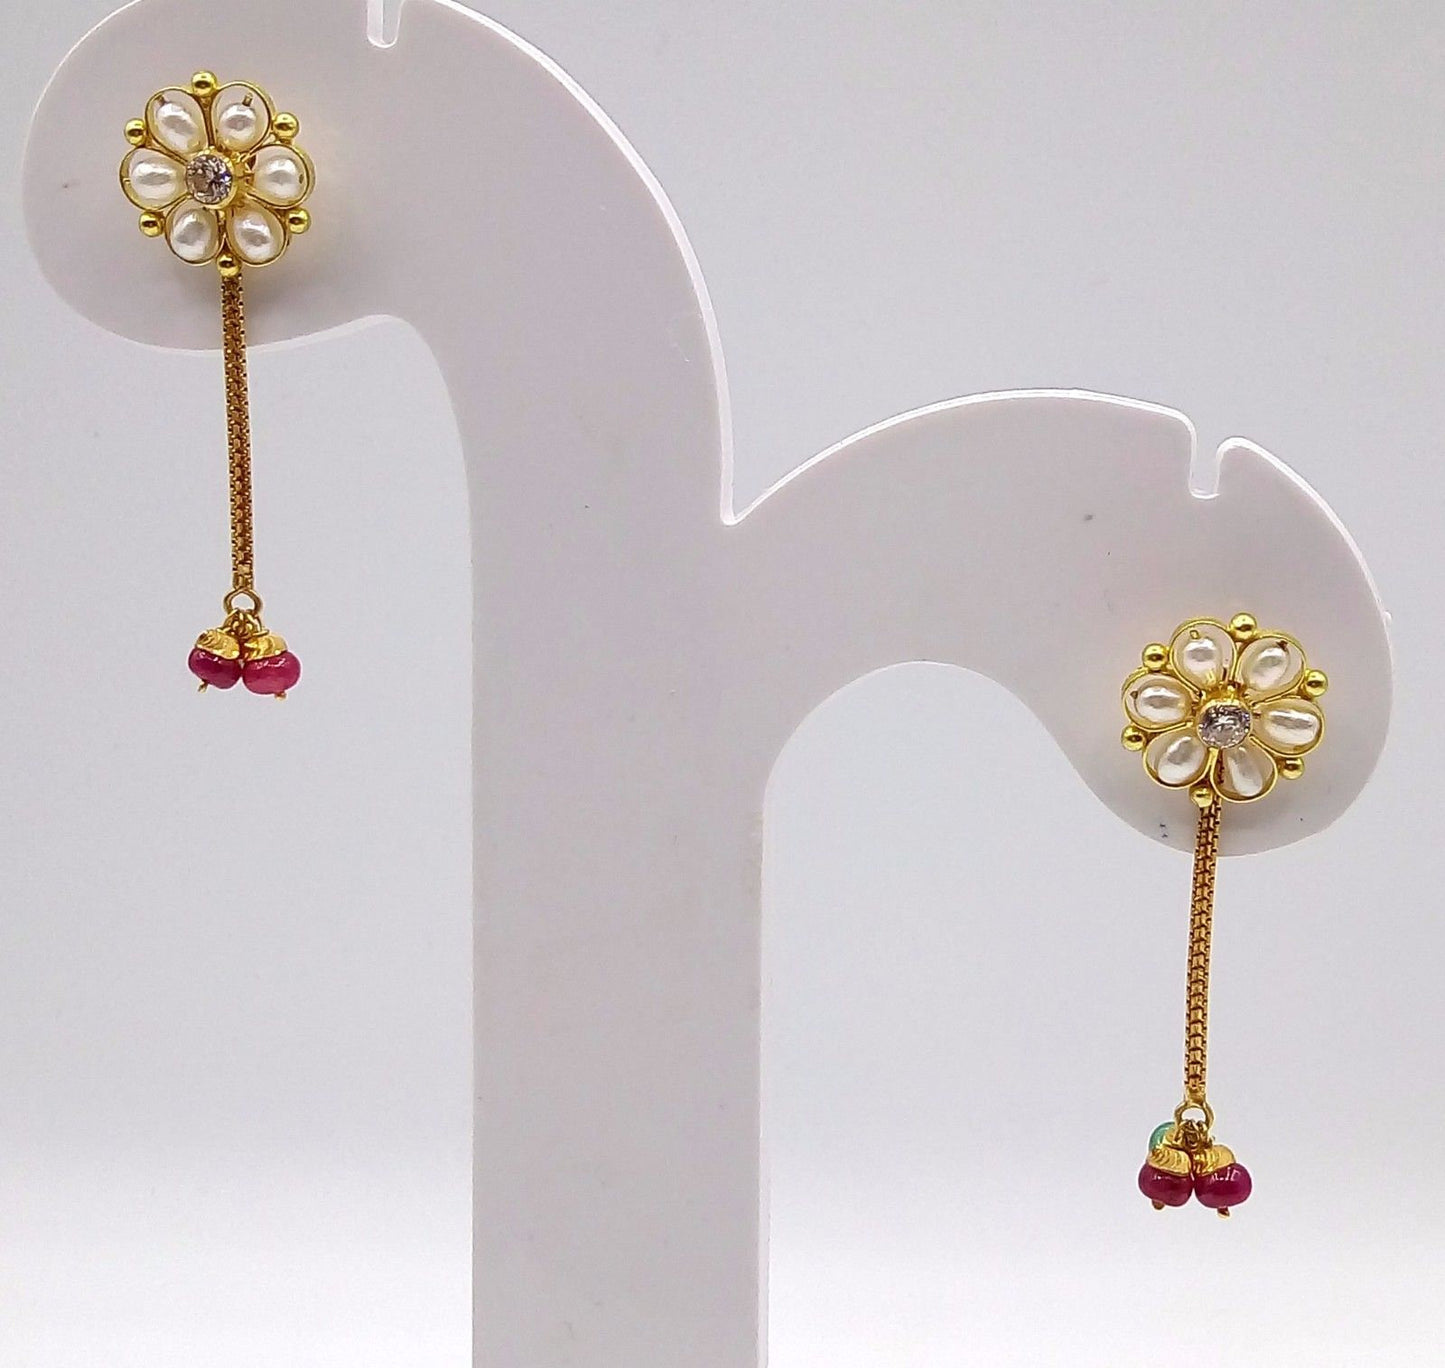 Fabulous flower shape real pearl 22kt yellow gold handmade stud earring with dangling color stone women's girls jewelry - TRIBAL ORNAMENTS